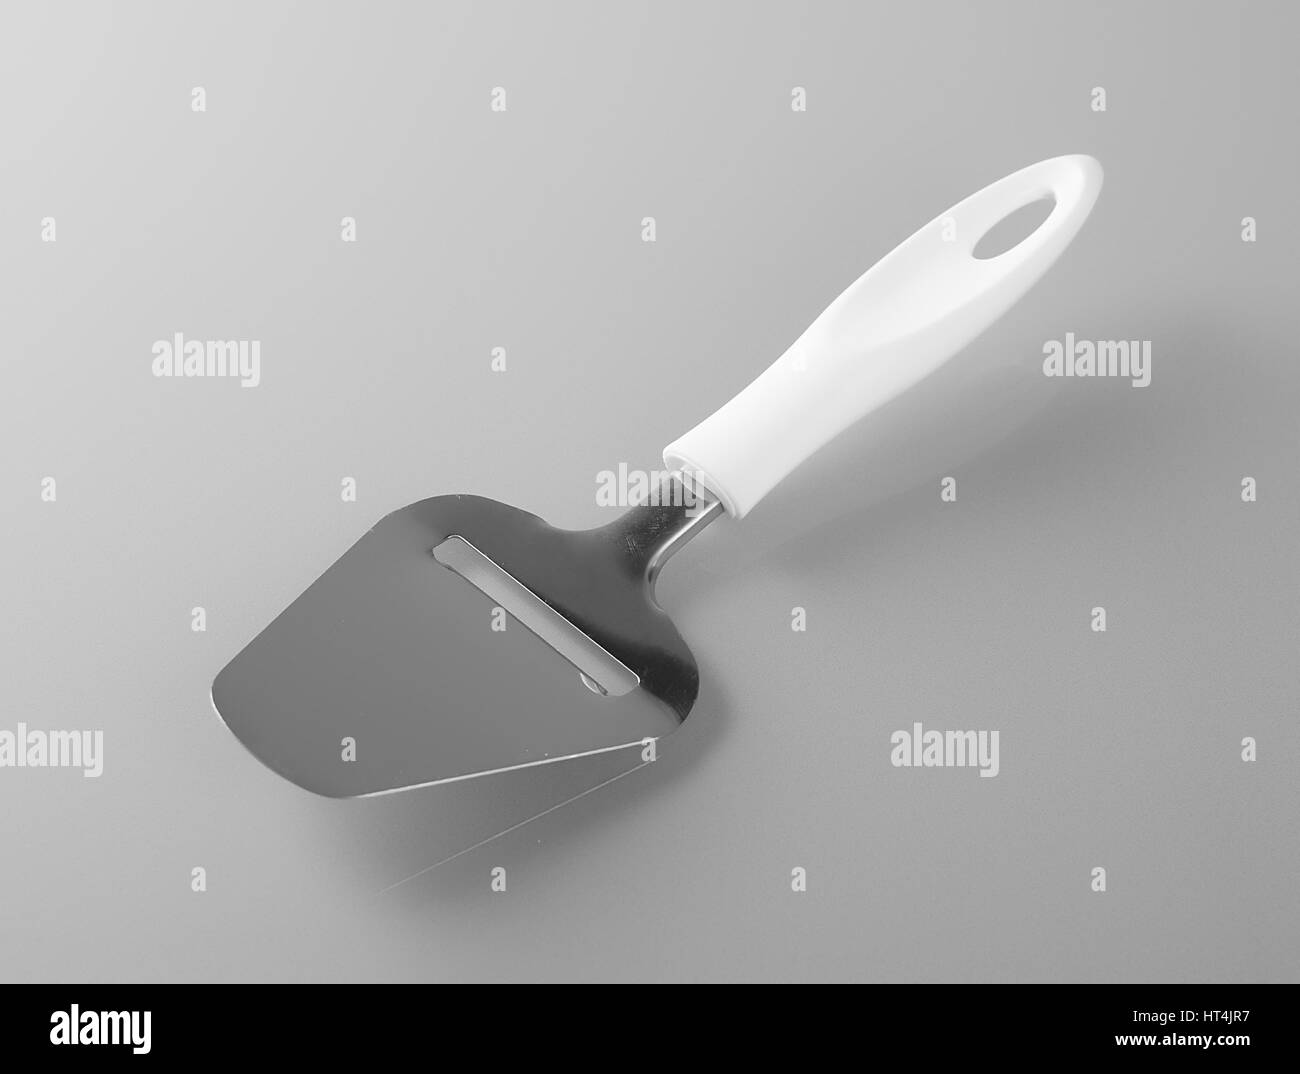 Knife for cutting cheese. Cheese slicer with blade and plastic handle, made of stainless steel Stock Photo